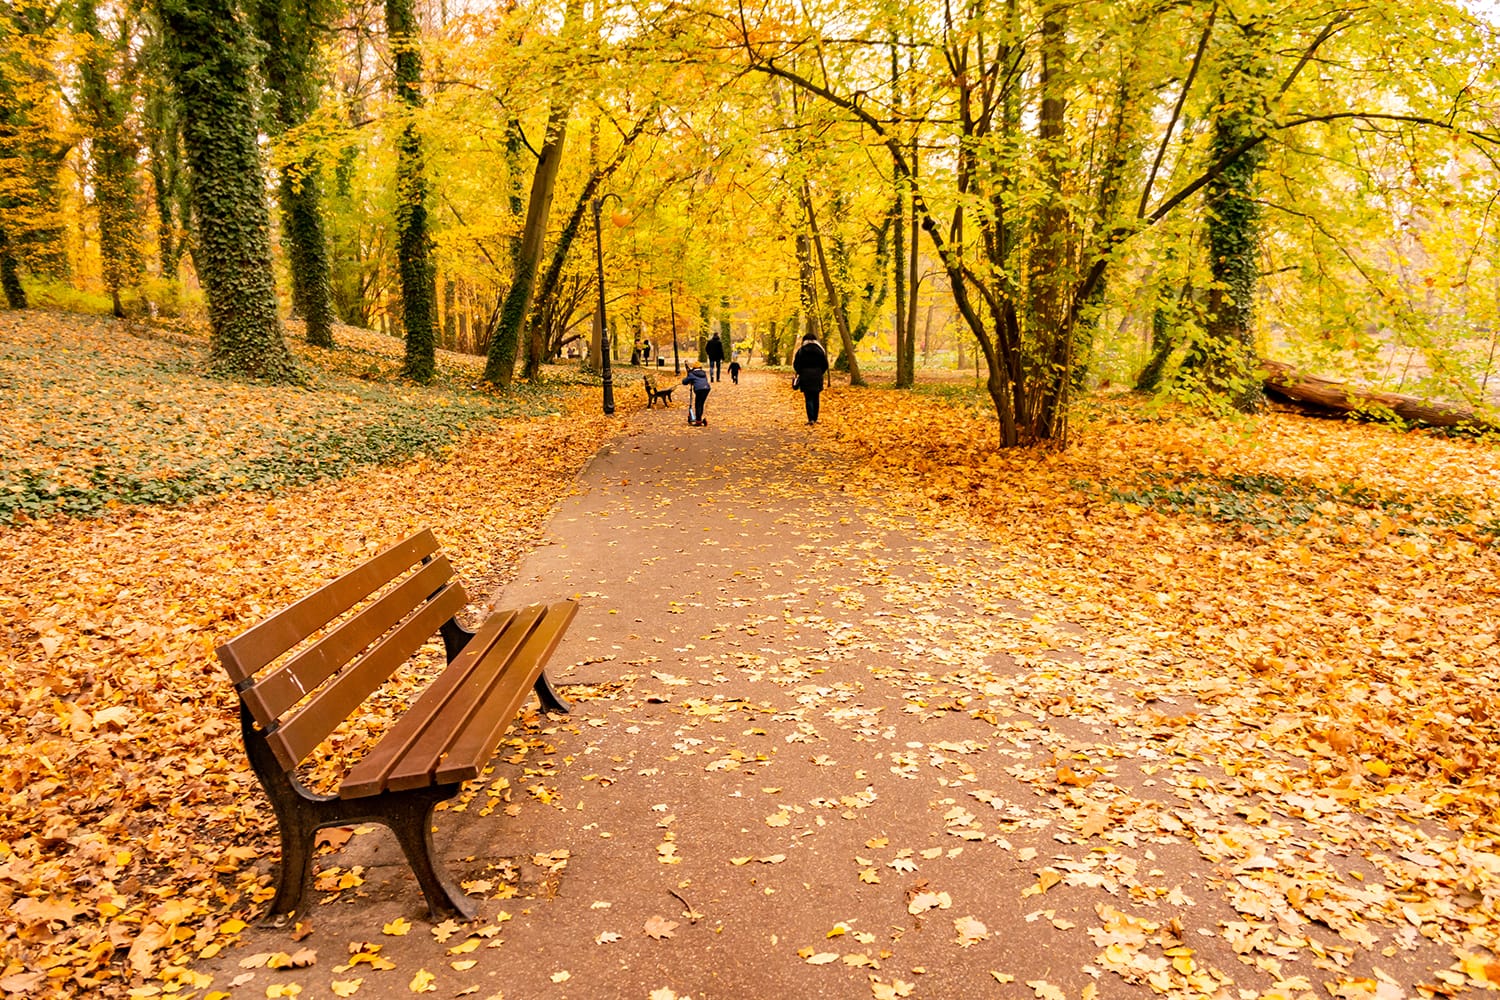 Footpath with walking people and a bench along trees in the Solacki park in the autumn seaso